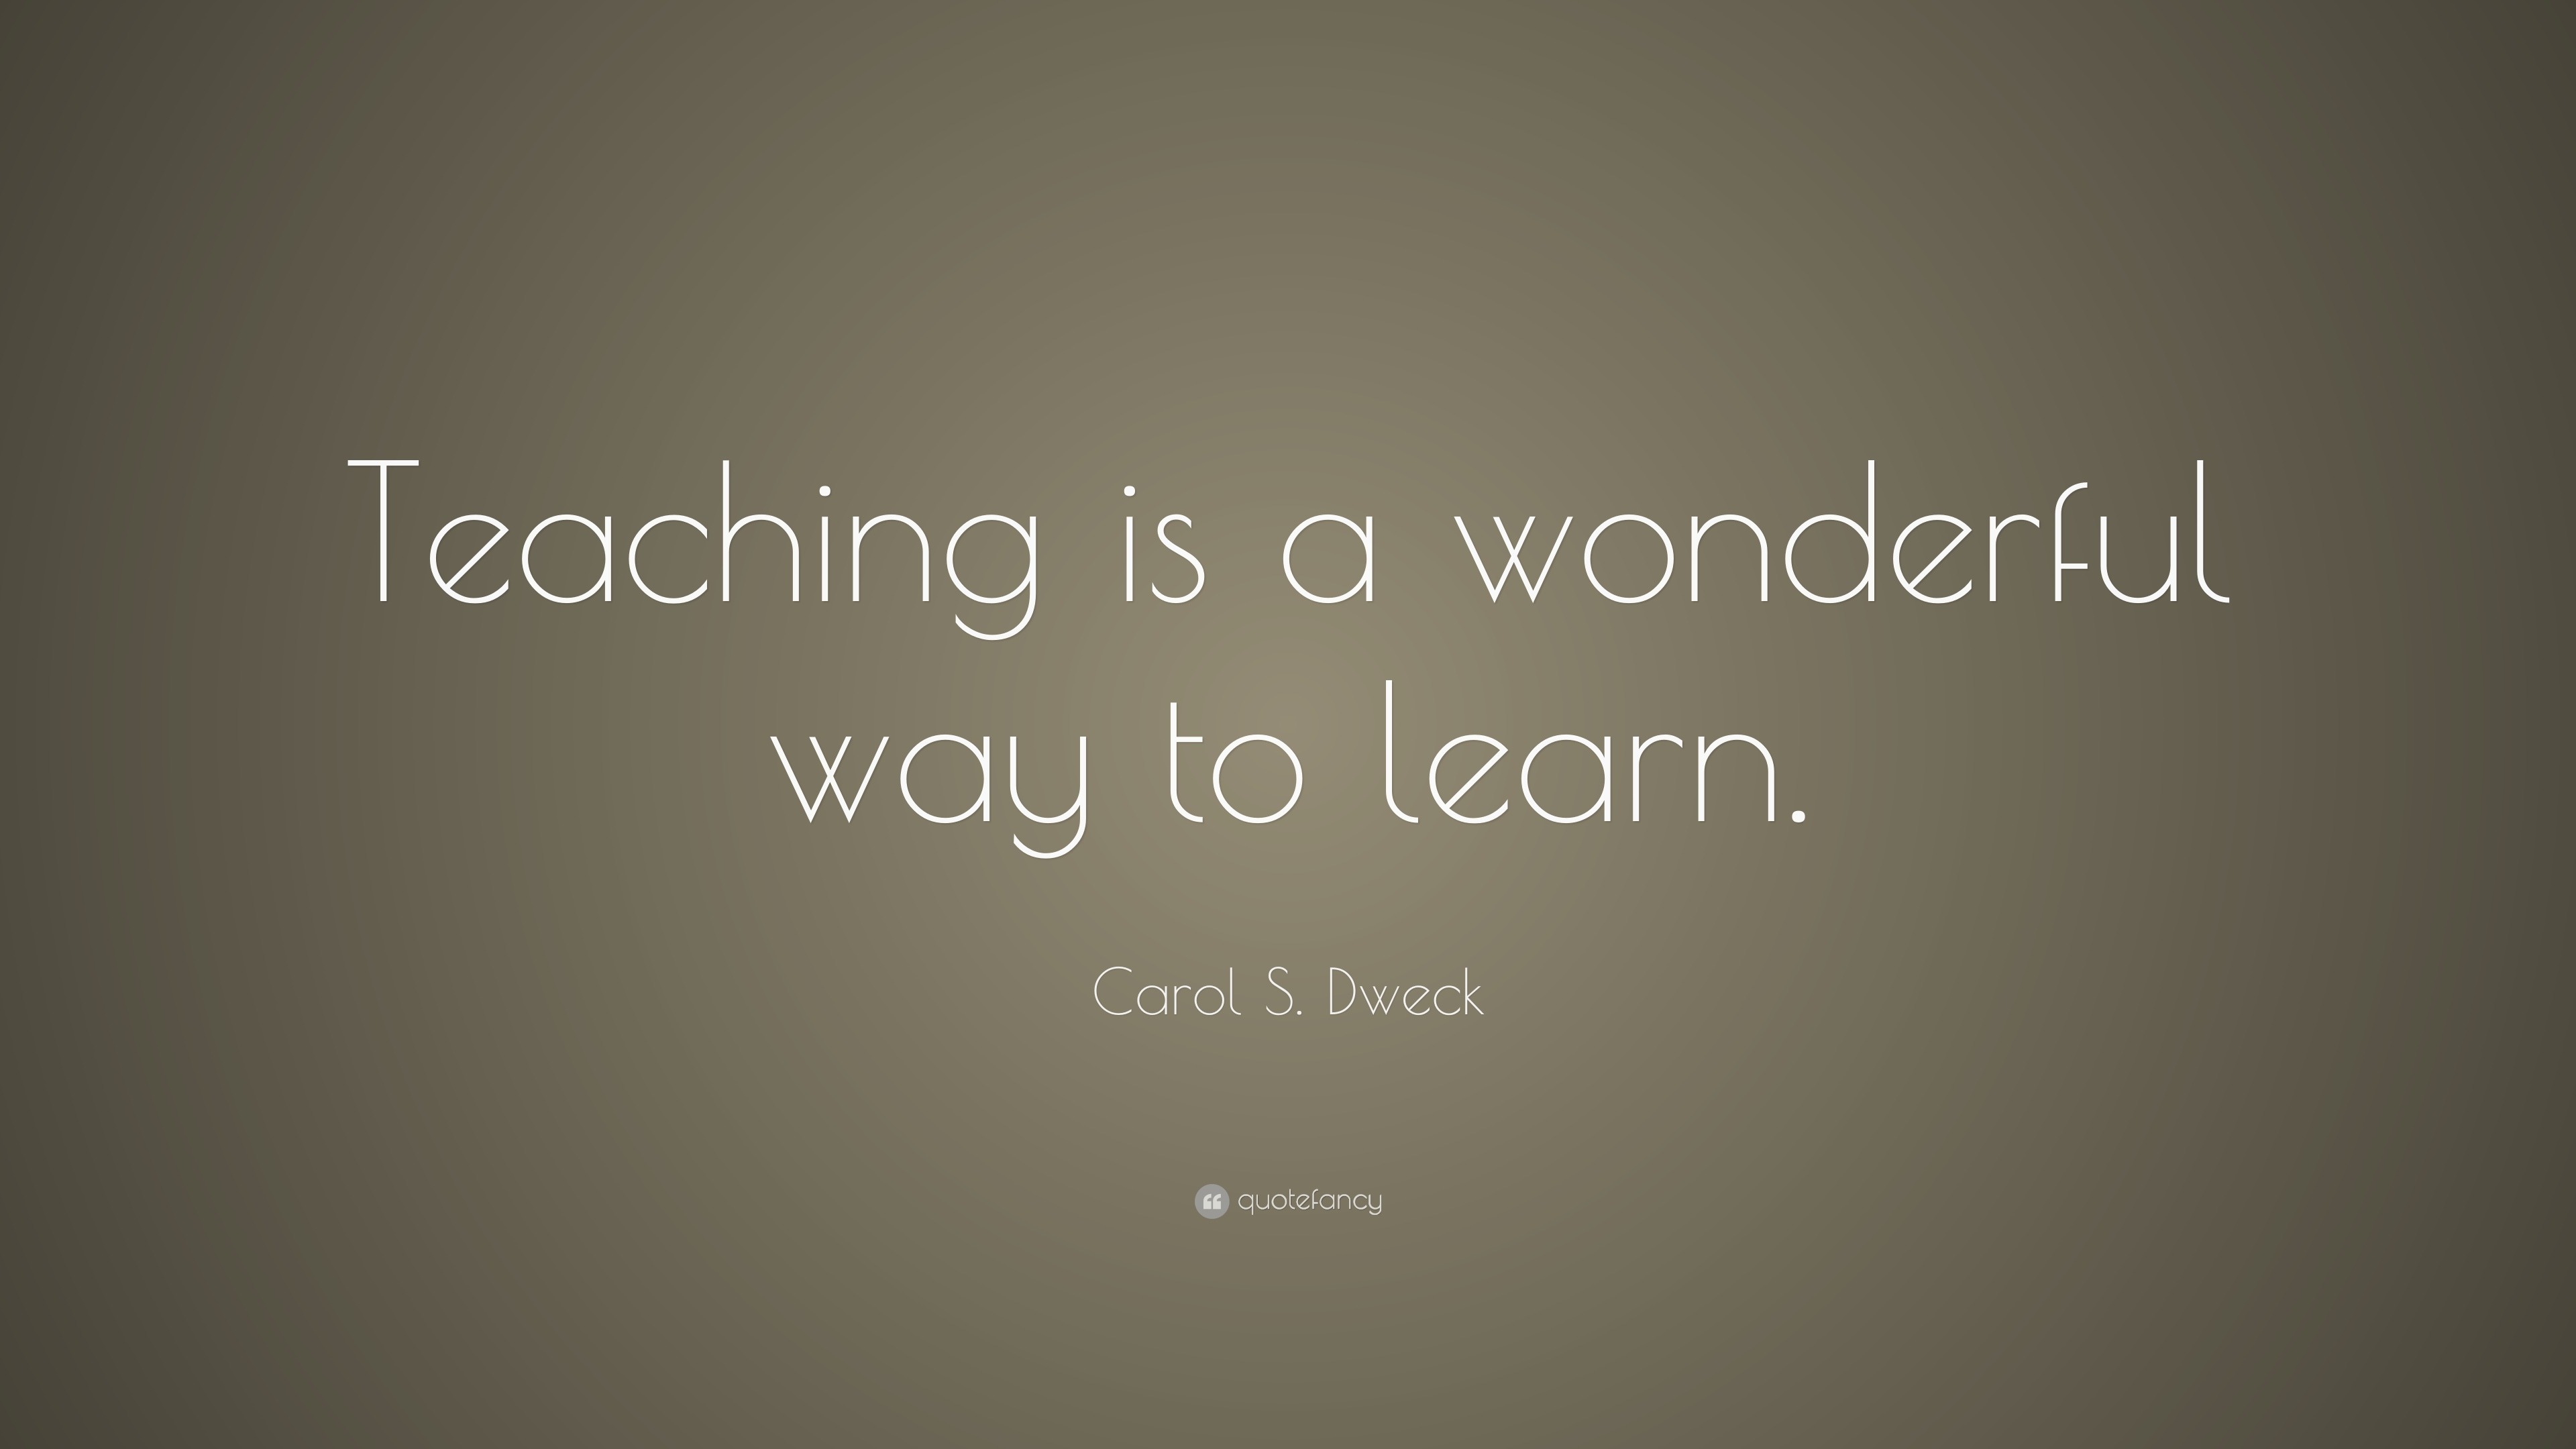 Carol S. Dweck Quotes (33 wallpapers) - Quotefancy